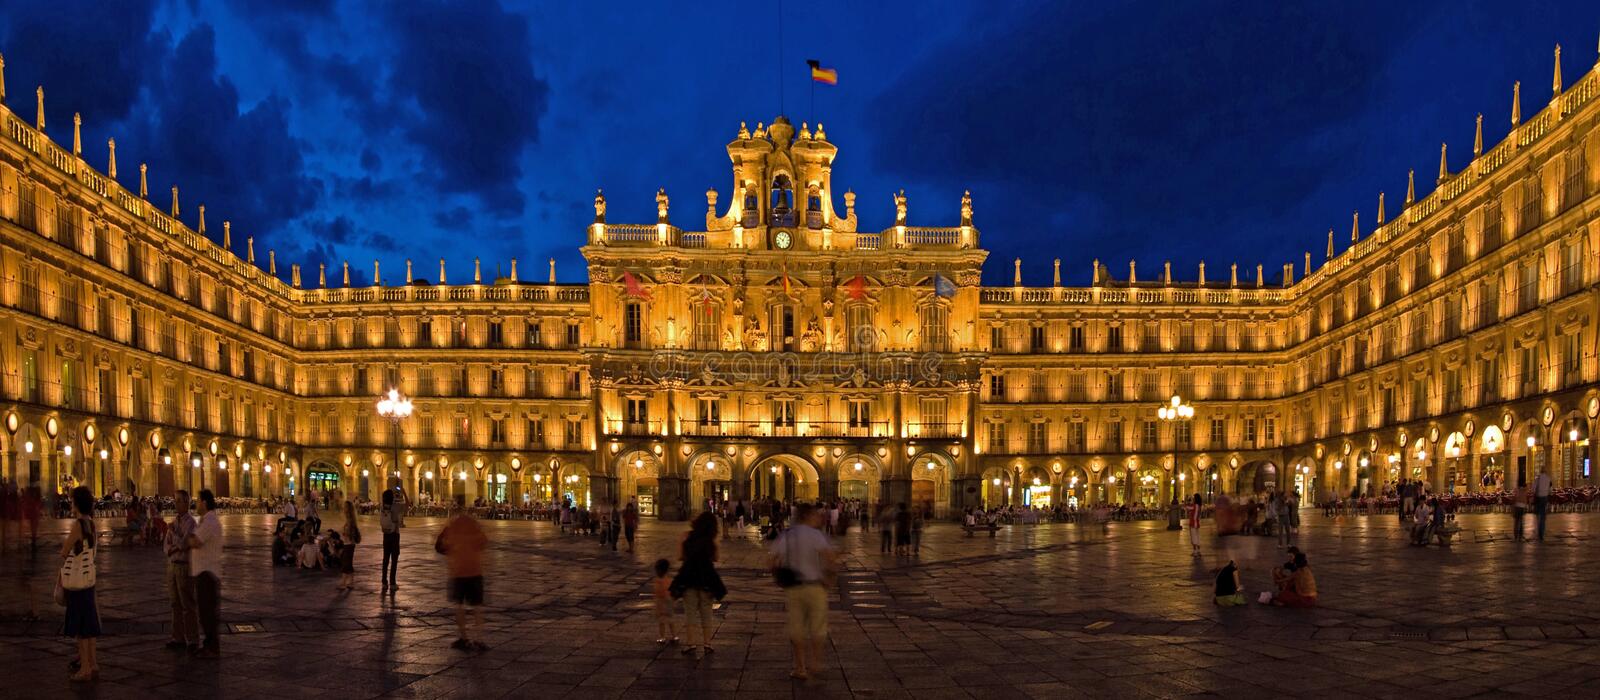 The University of Salamanca, college, university, students, about, fun fact, founded in